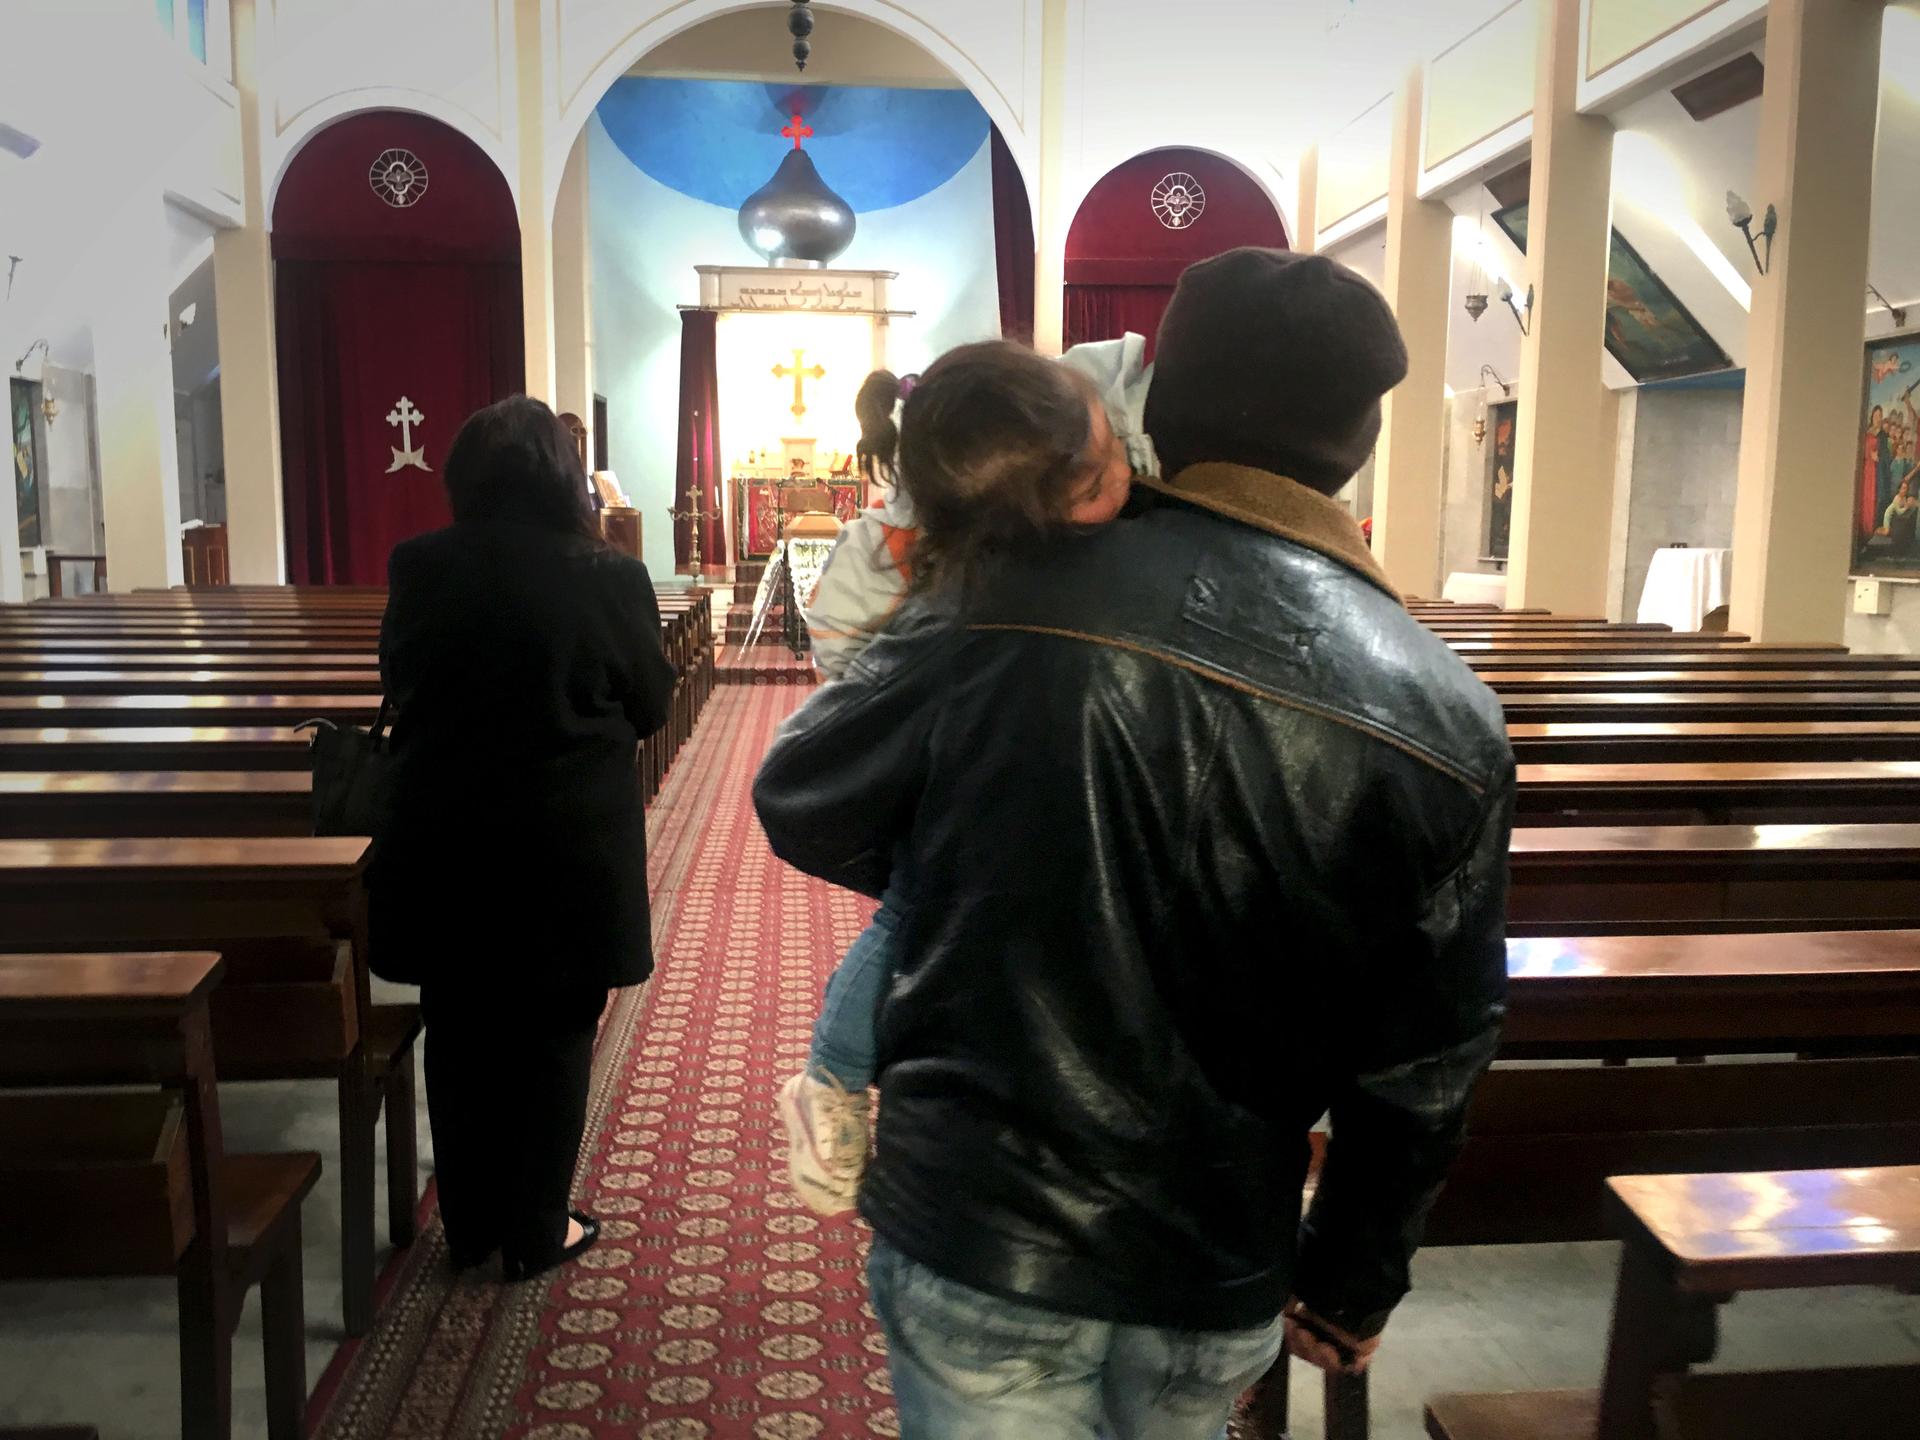 Abu Radwan and his family converted to Christianity after they fled Syria to Lebanon. He says it's a genuine conversion, though he does say he thinks it might help him get resettled in the West.